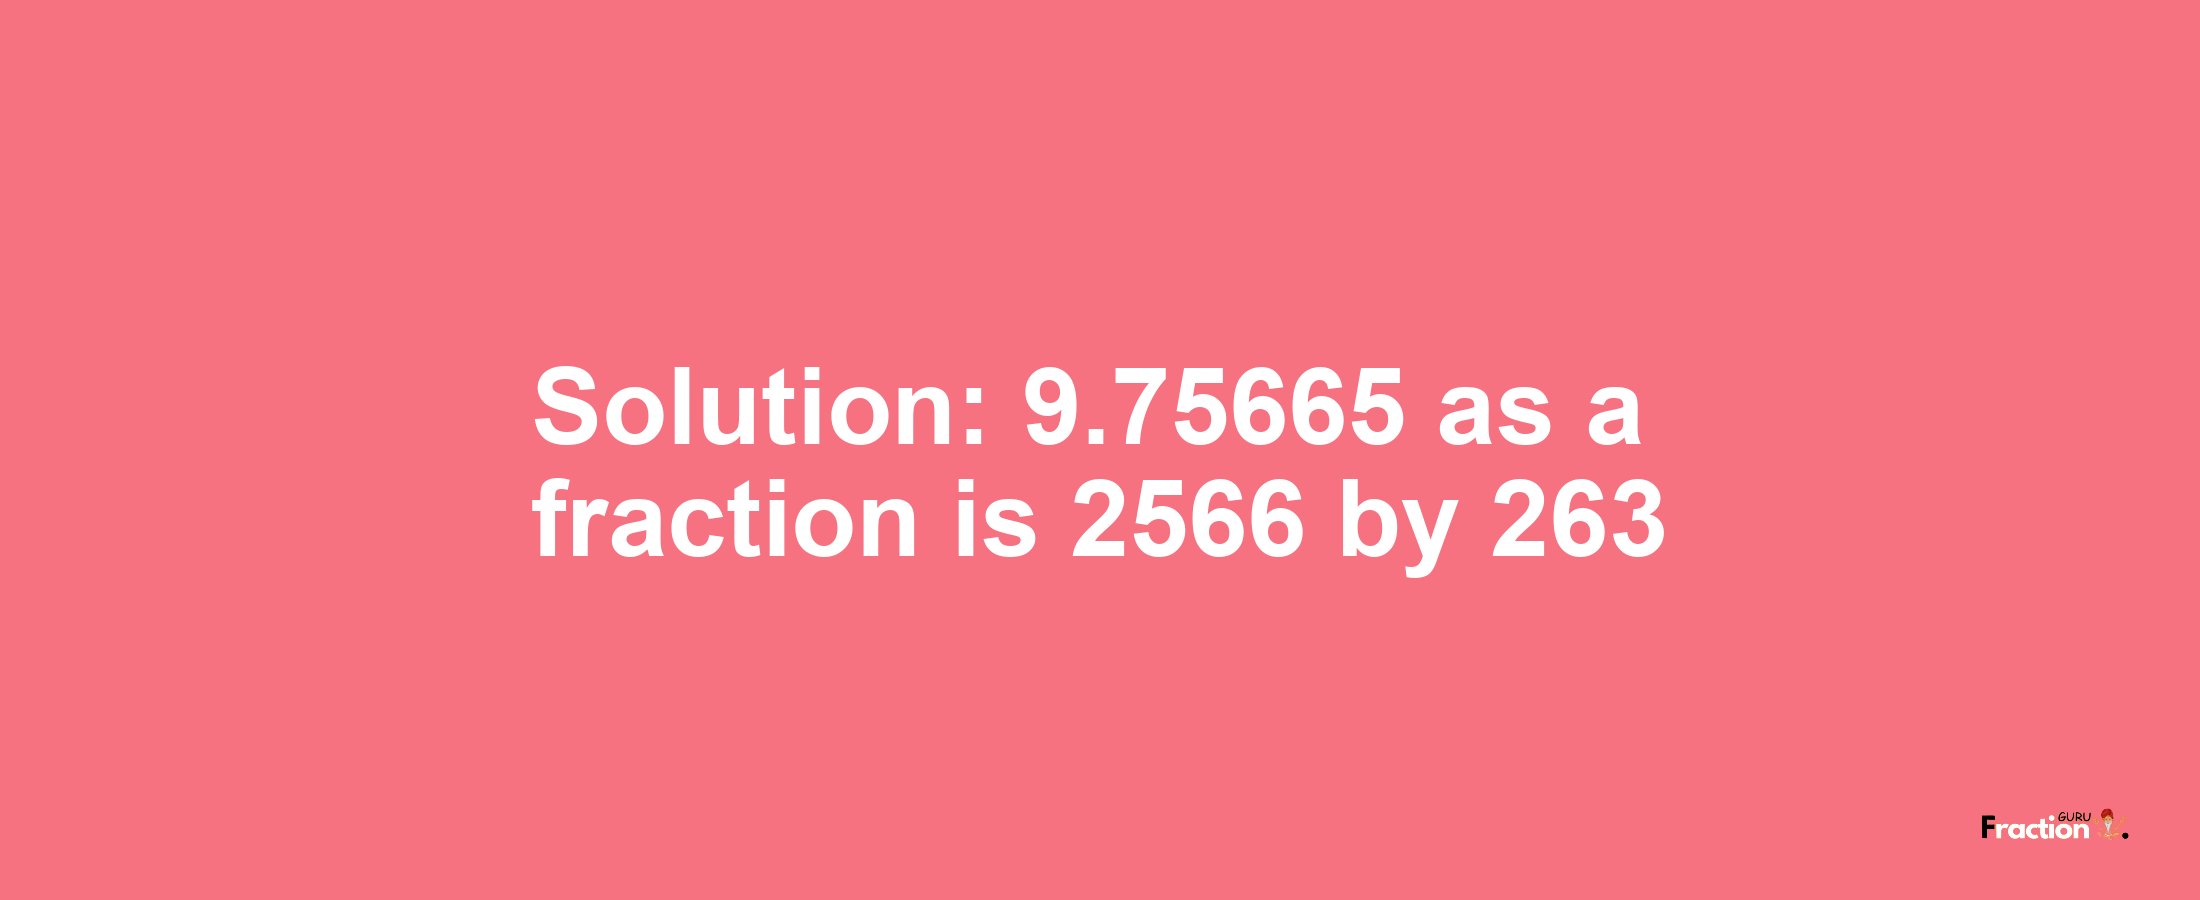 Solution:9.75665 as a fraction is 2566/263